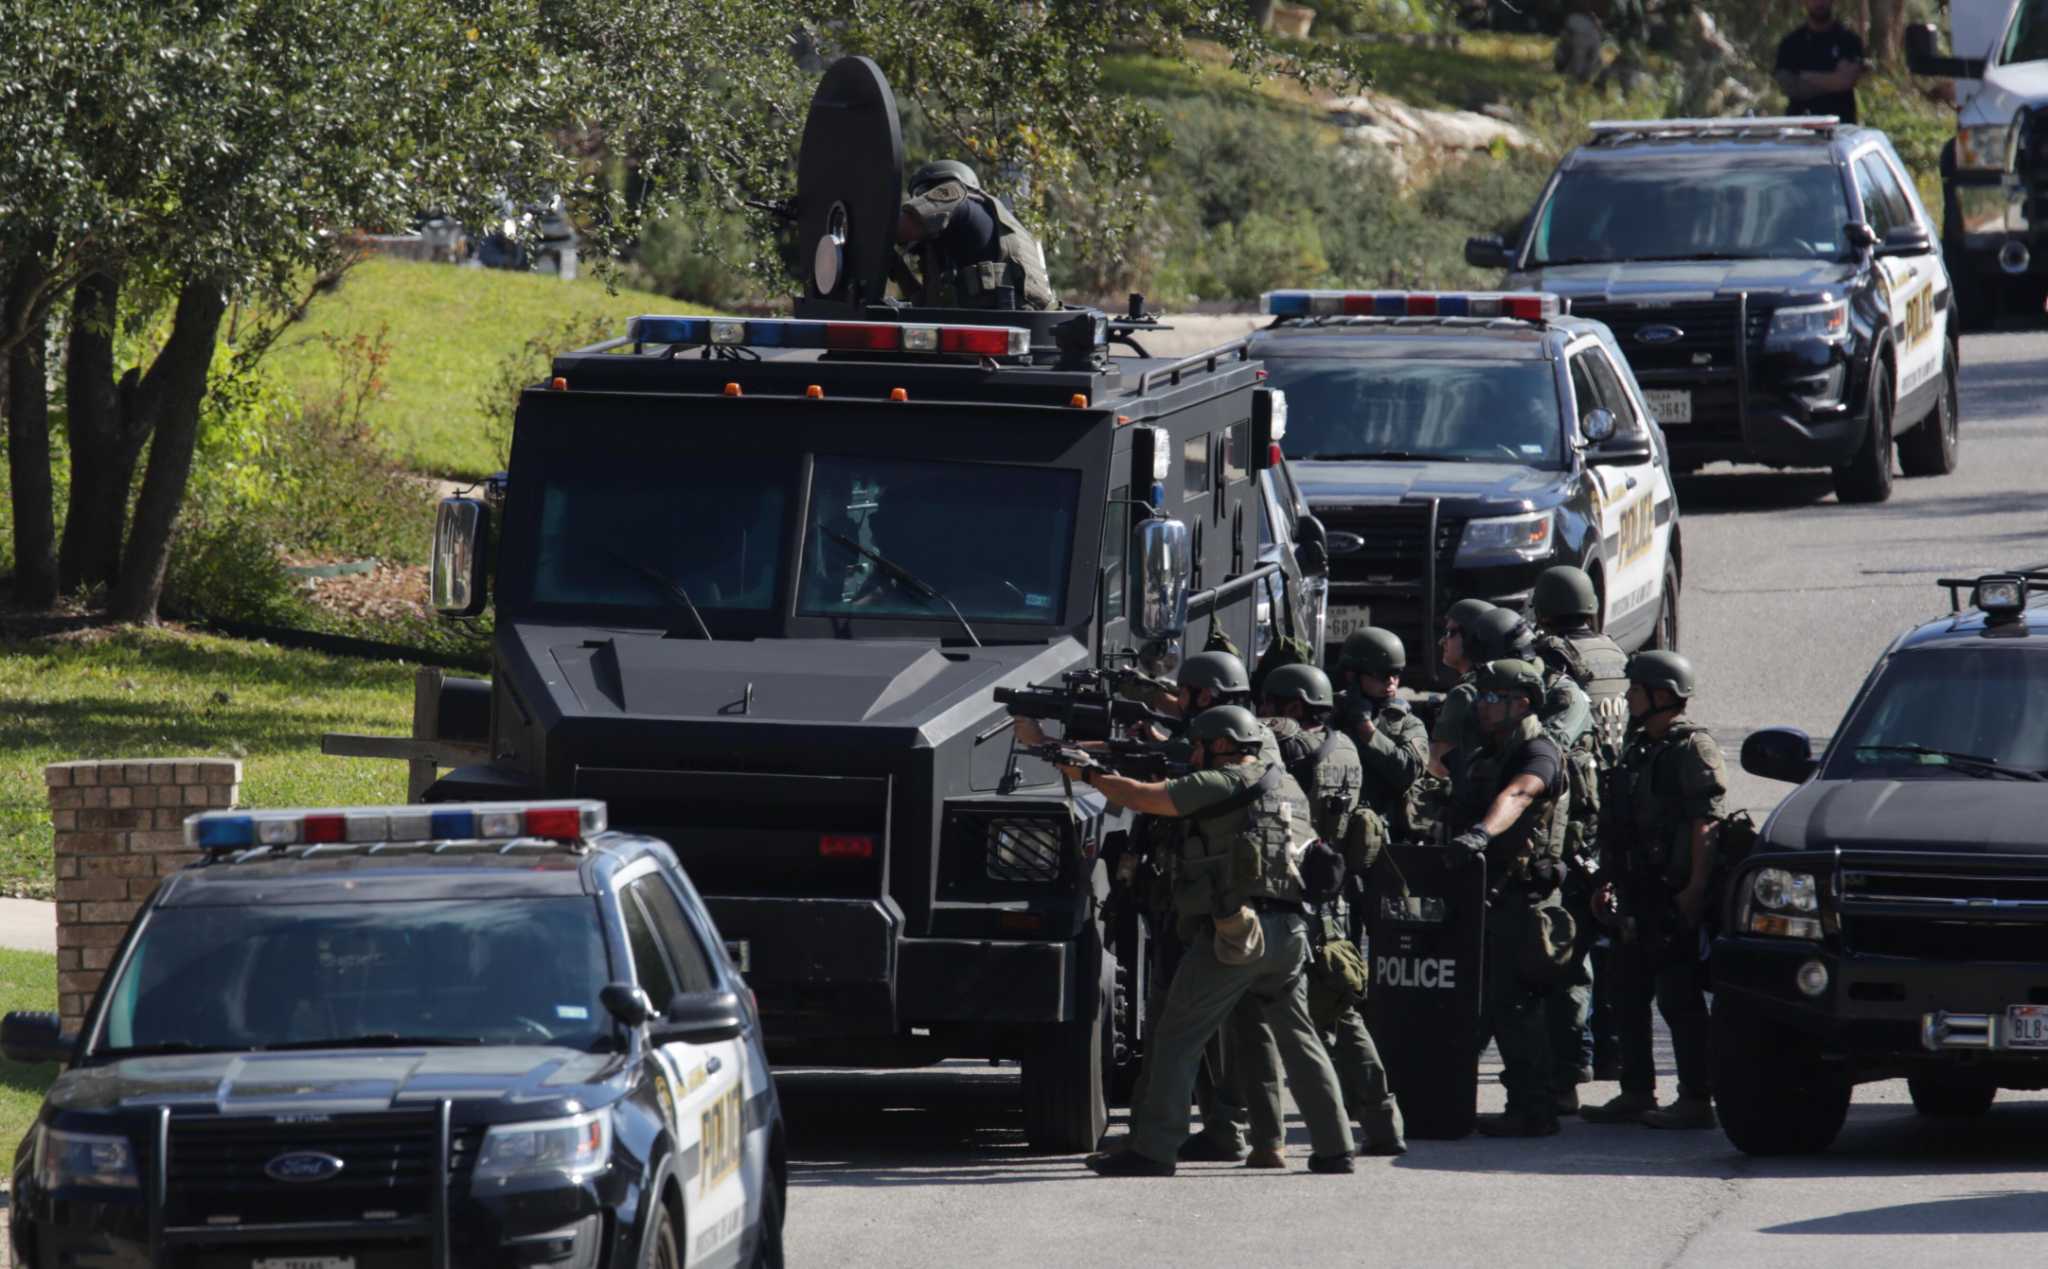 Couple Found Dead In Suspected Murder Suicide After Swat Standoff Identified 5550